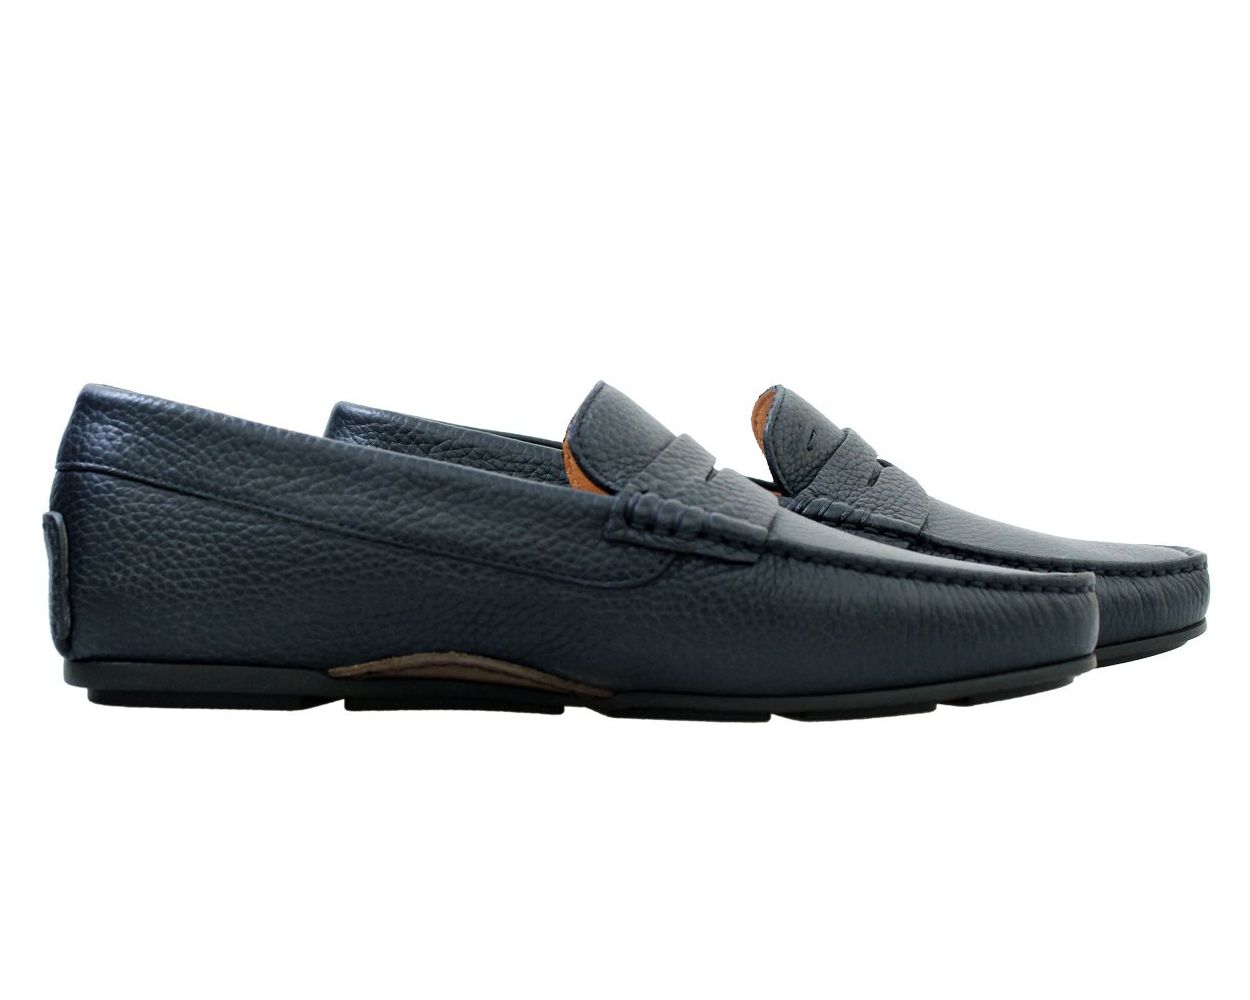 Santoni Navy Blue Leather Driving Shoes | Robert Old